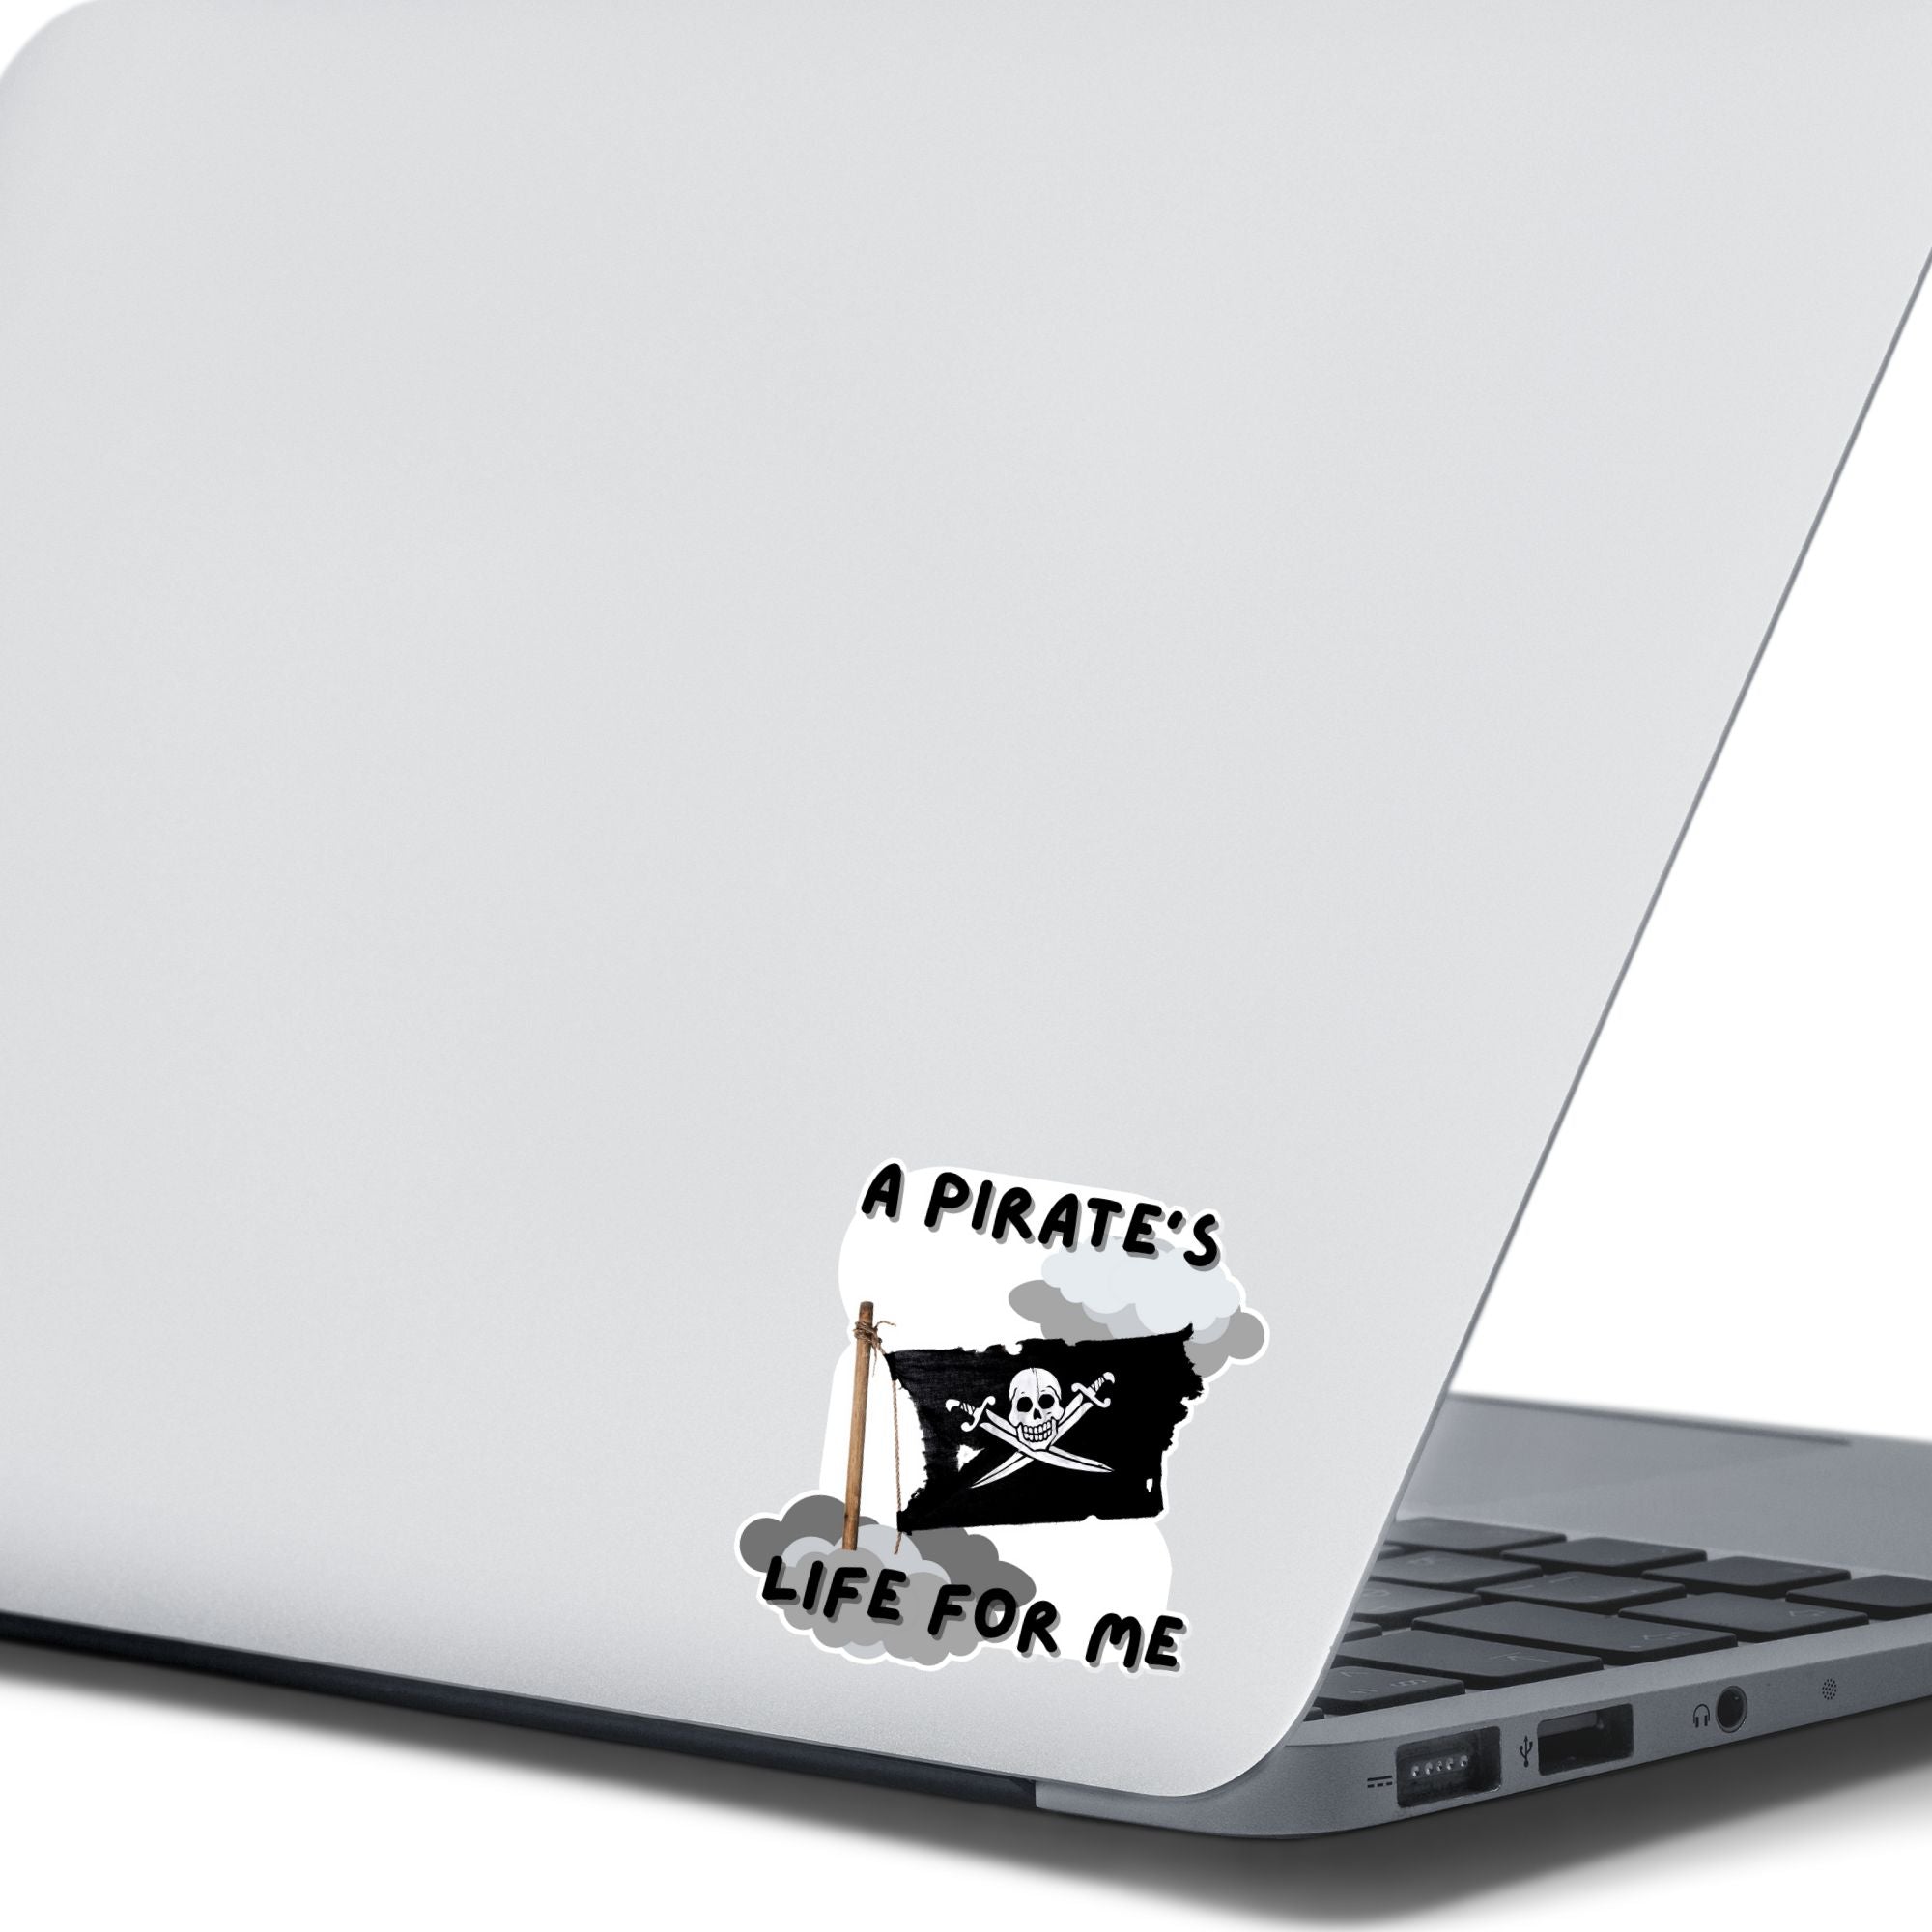 If you think a pirate's life is for you, then this individual die-cut sticker is just what you need! This pirate's life sticker features a jolly rodger (skull and crossed swords) flag with storm clouds and the saying "A Pirate's Life For Me". This image shows the pirate's life sticker on the back of an open laptop.